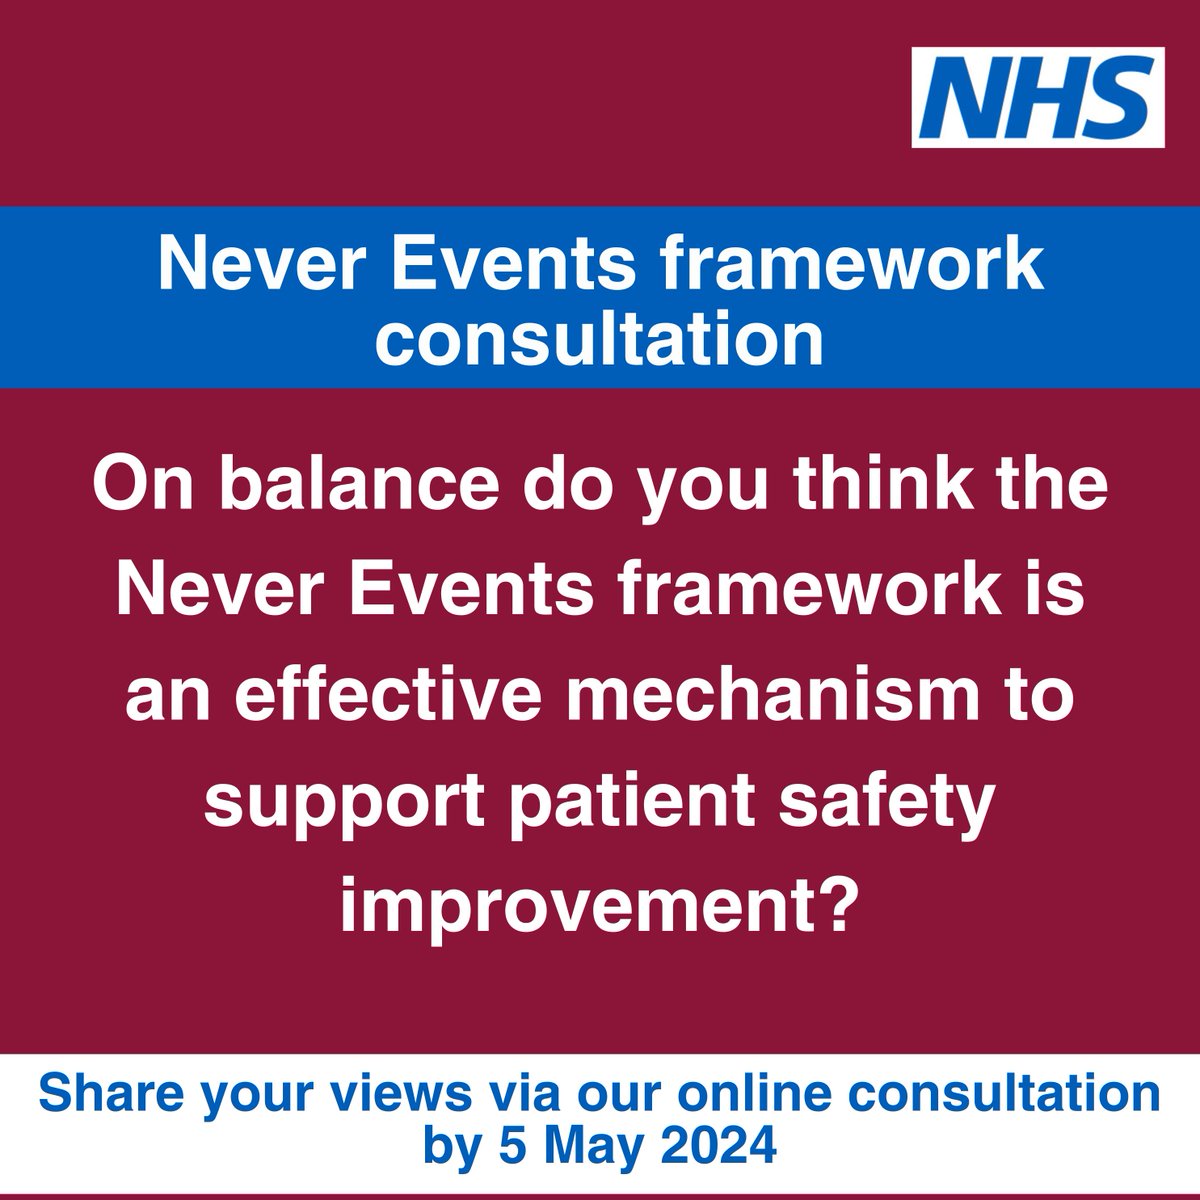 To ensure the Never Events framework is still meeting its purpose to support the NHS to improve patient safety, we have launched a consultation seeking views on the future of the framework. Find out more and have your say 👉 engage.england.nhs.uk/consultation/n… #NeverEvents #PatientSafety